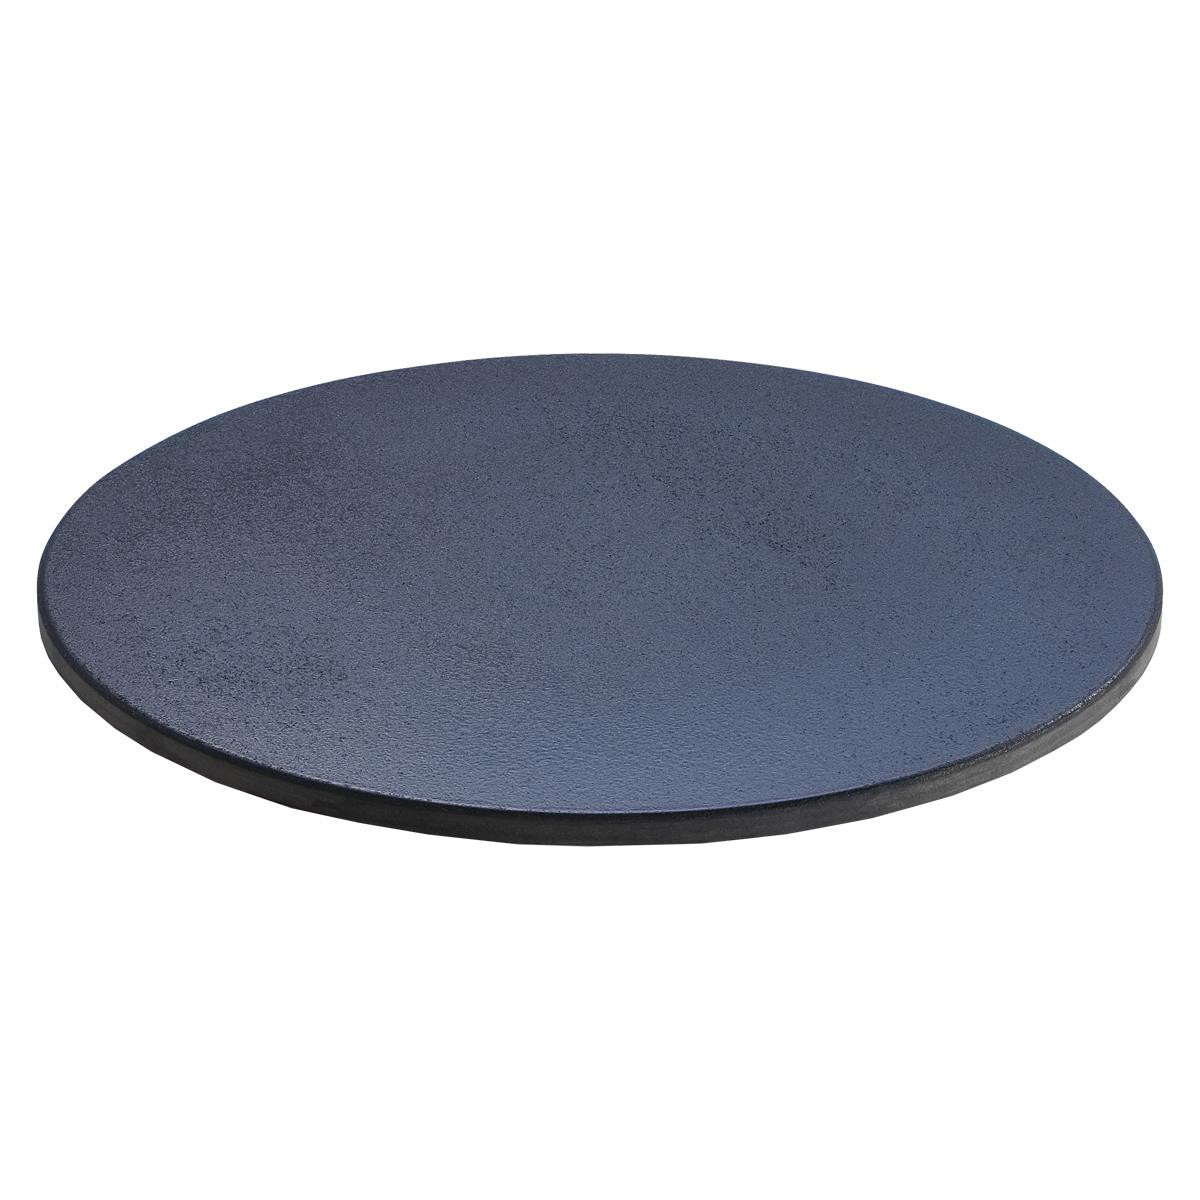 Image of LotusGrill Standard Pizza Stone Set